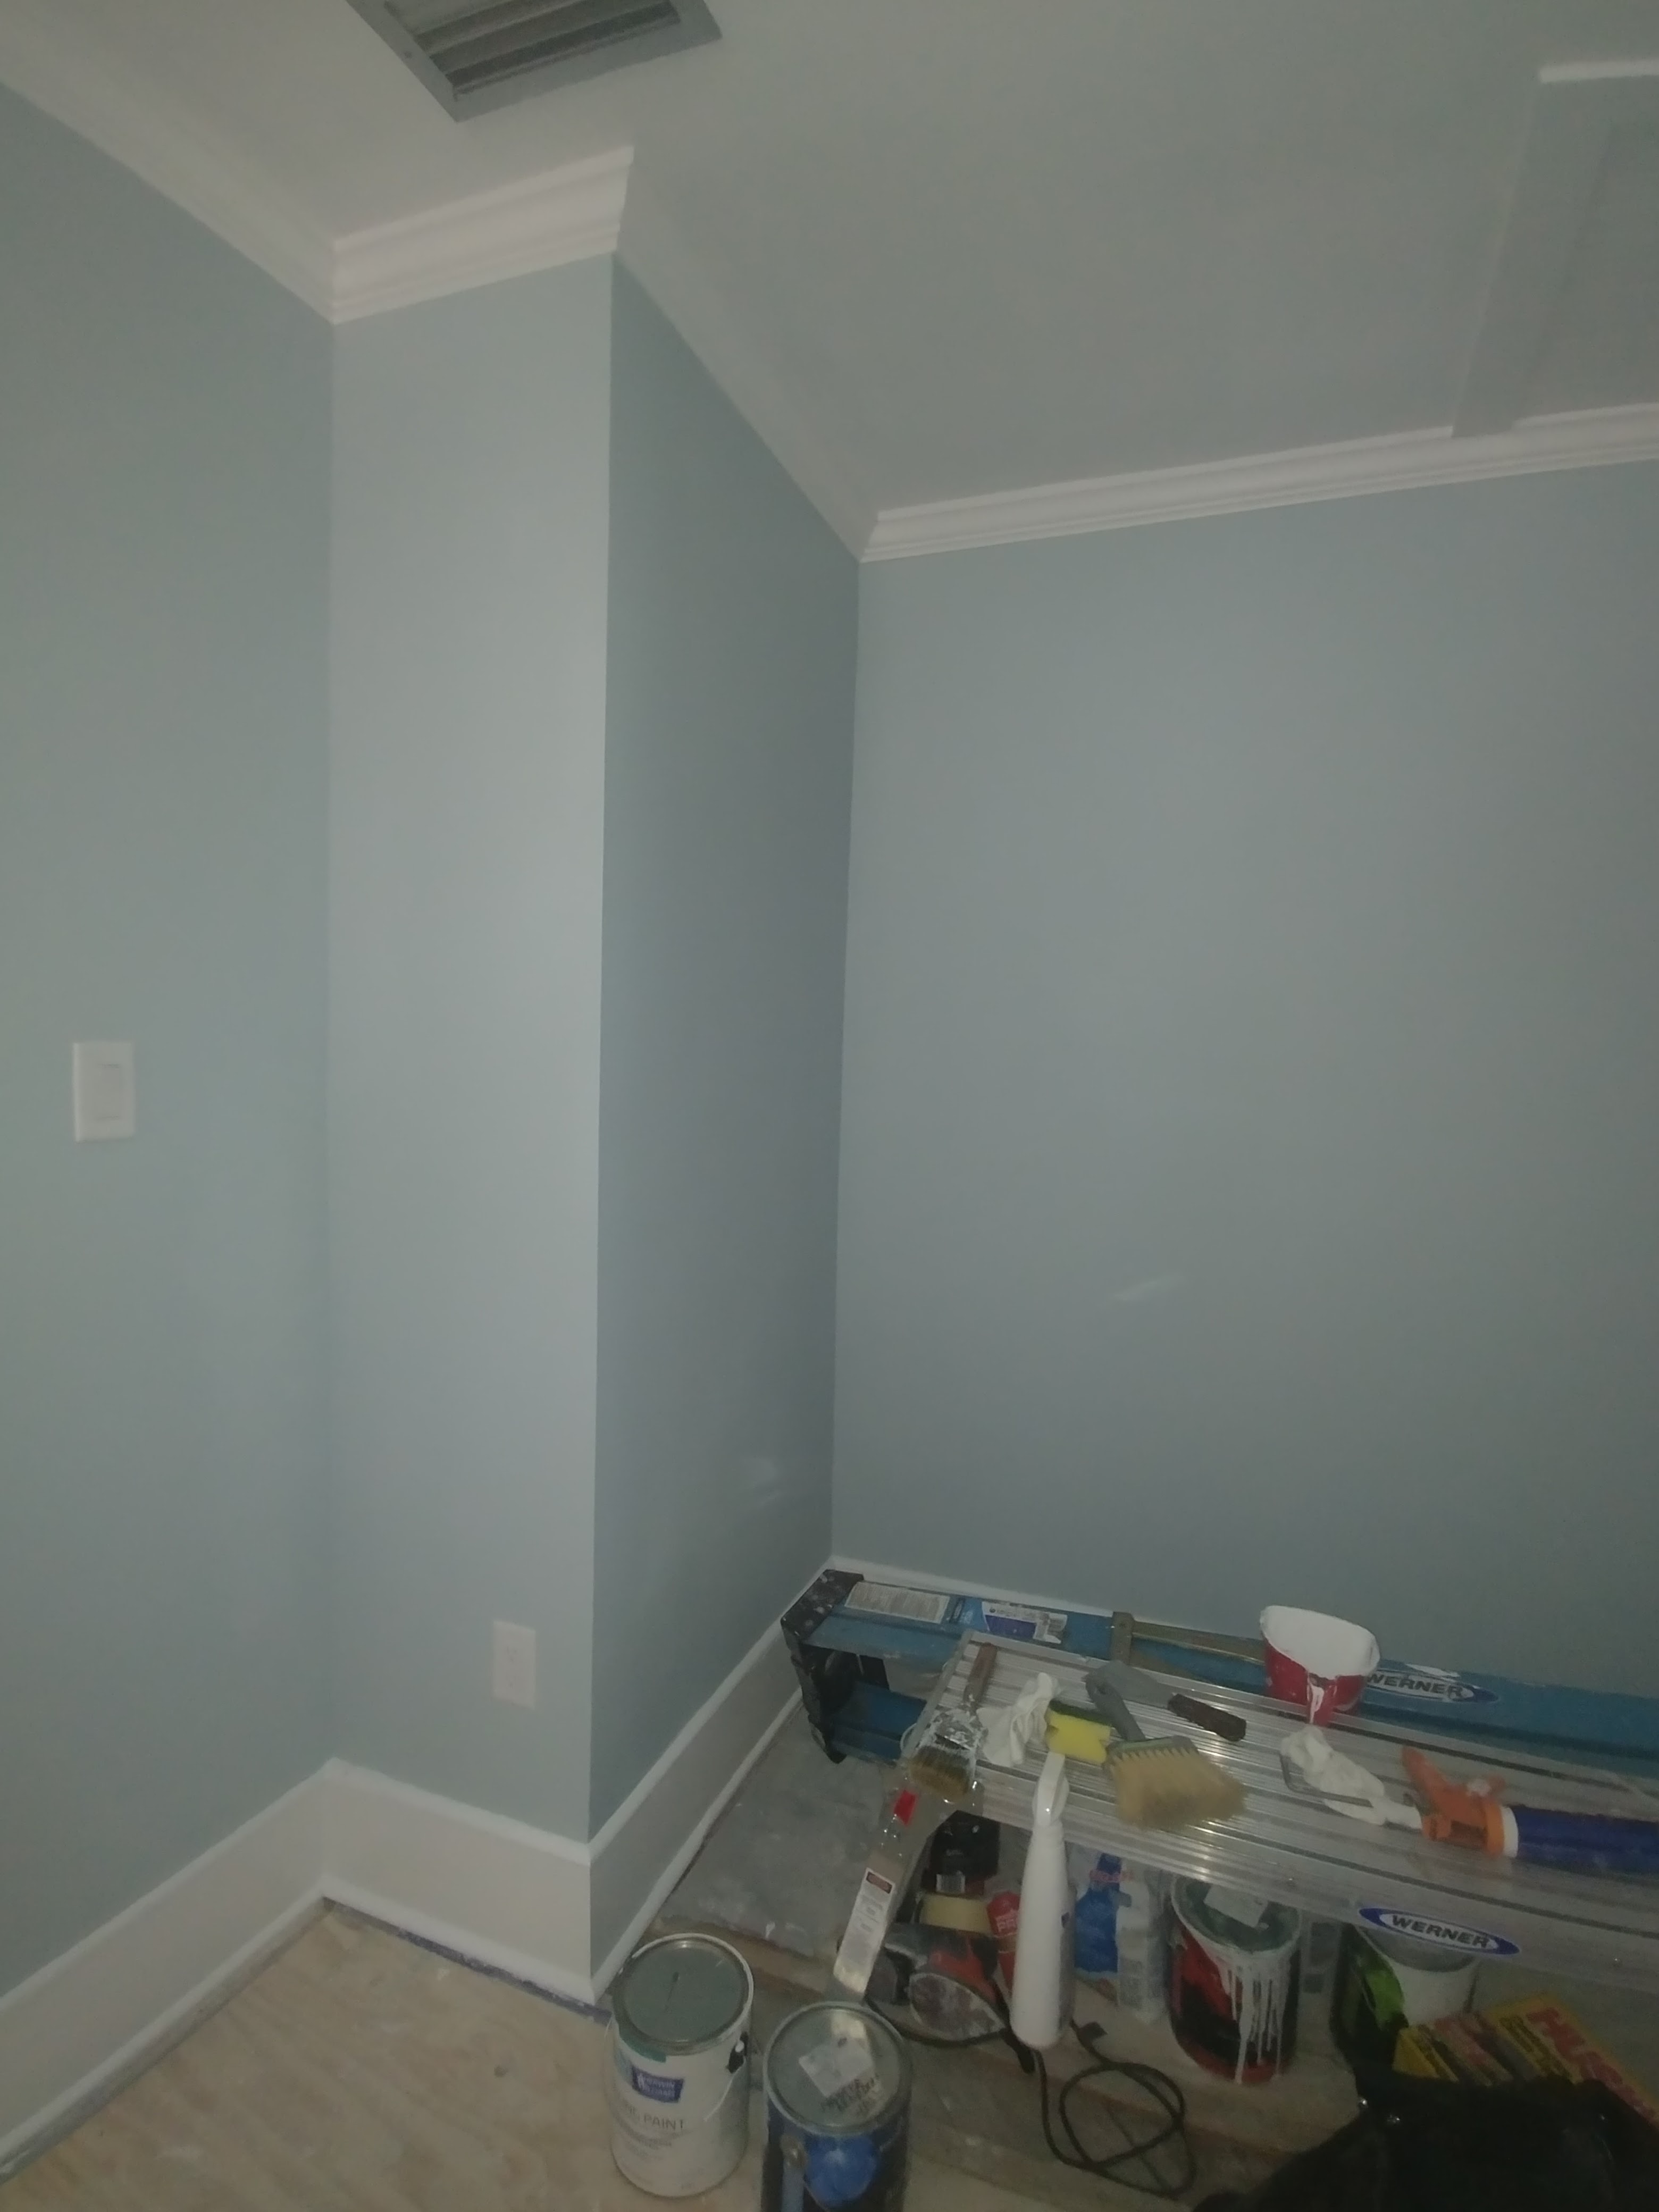 Meador Painting - Altamonte Springs, FL, US, best colour for living room